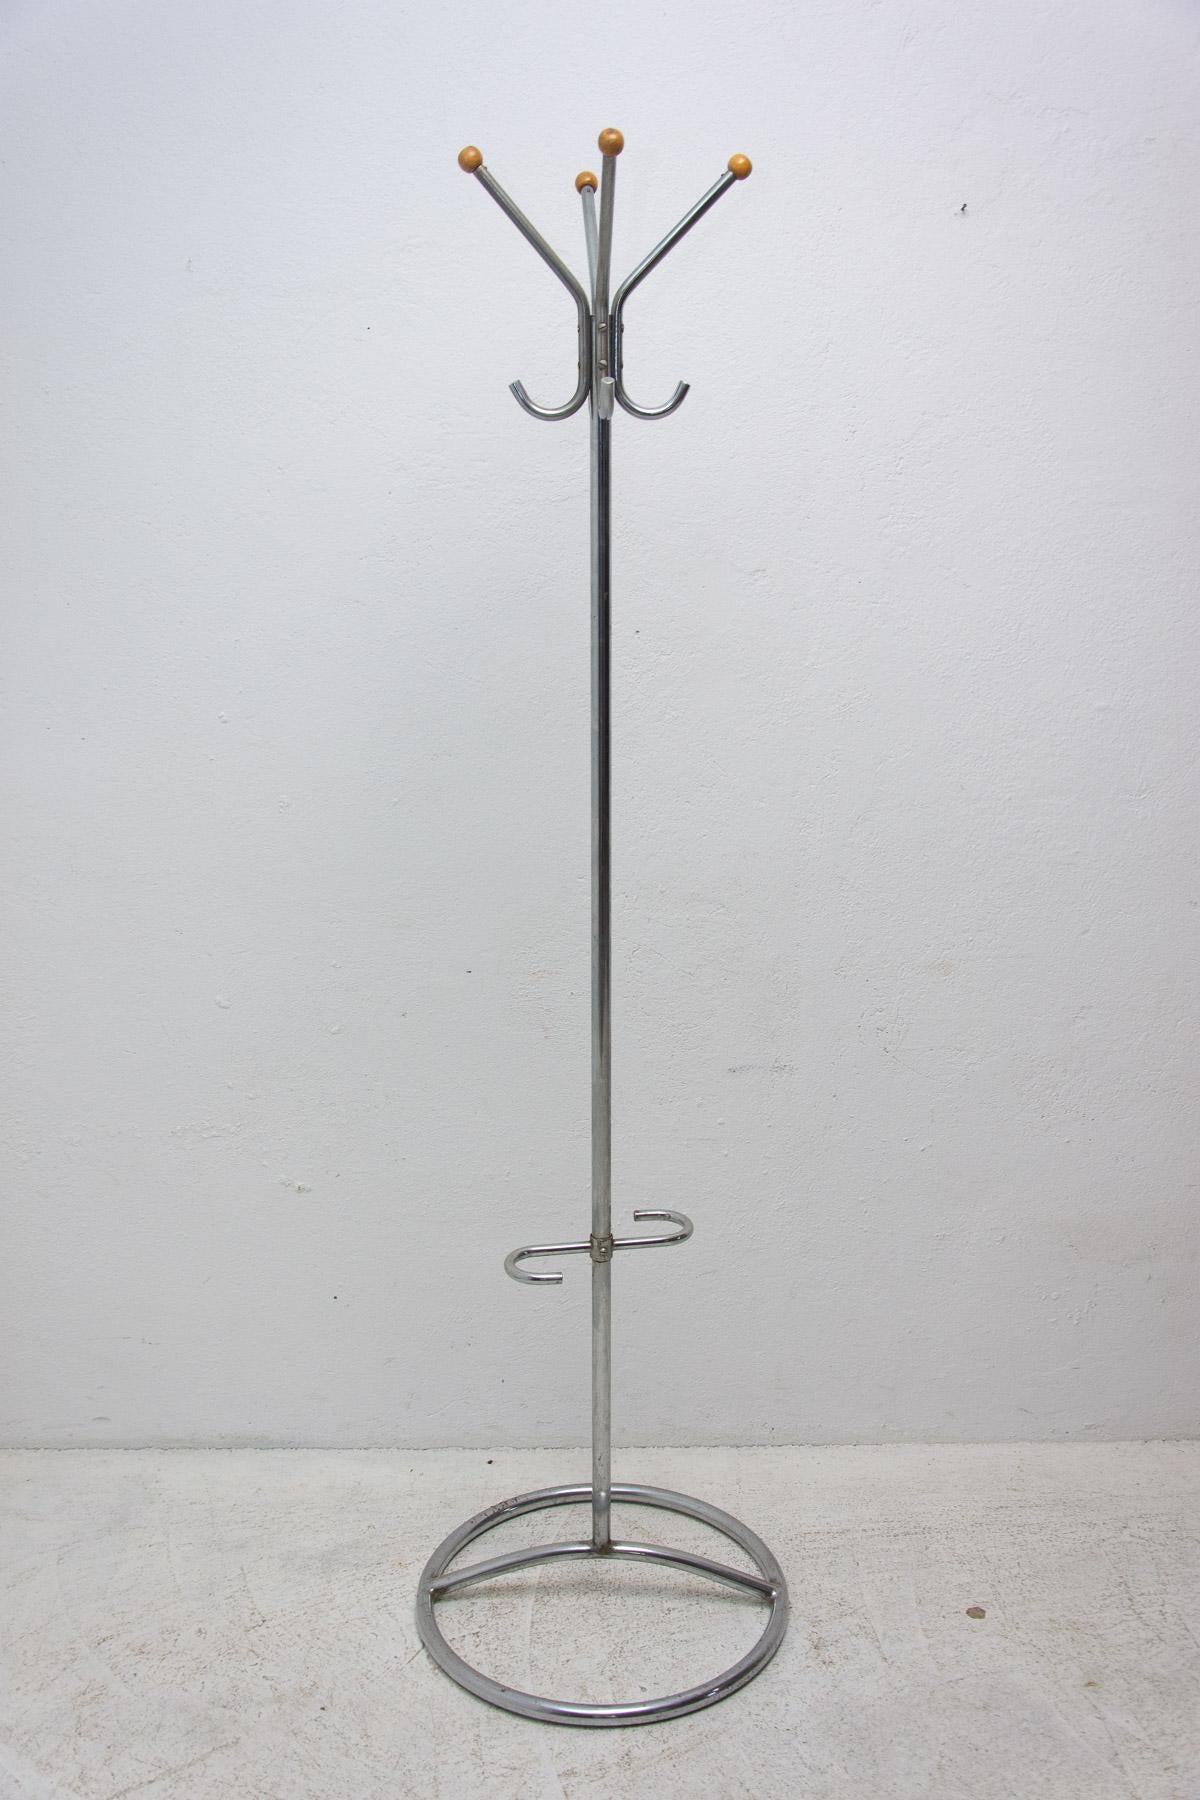 For all Bauhaus lovers! A beautiful example of Bohemian pre-war functionalism represents this model of coat rack. This hanger was designed probably by Gottwald or Slezák company in Bohemia in the 1930s and produced in the 1950´s. It features a